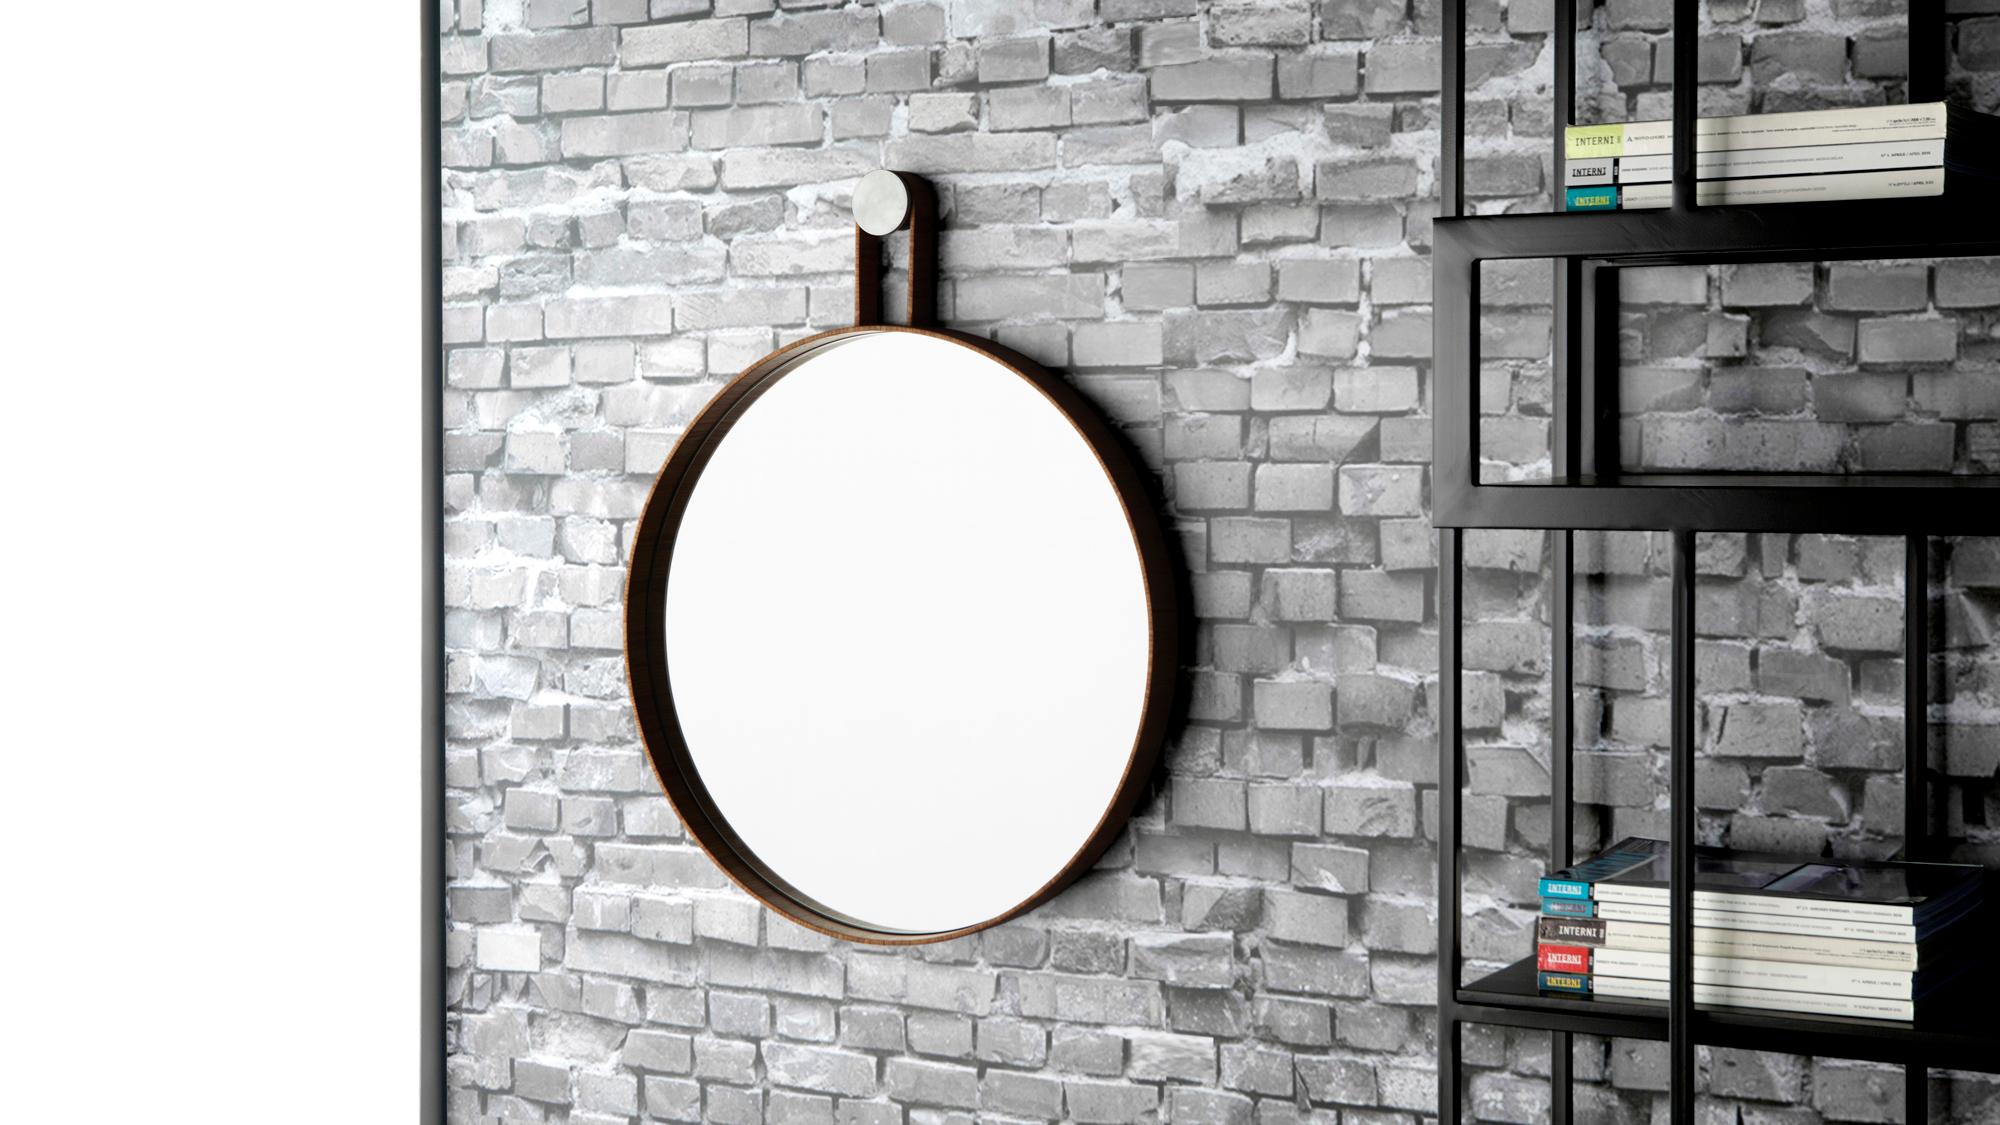 Ora Mirror by Doimo Brasil
Dimensions:  D 60 x H 5 cm 
Materials: Finishing: Veneer.
 
Also available in D 90 x H 5, D 130 x H 5 cm. Please contact us. 

With the intention of providing good taste and personality, Doimo deciphers trends and follows